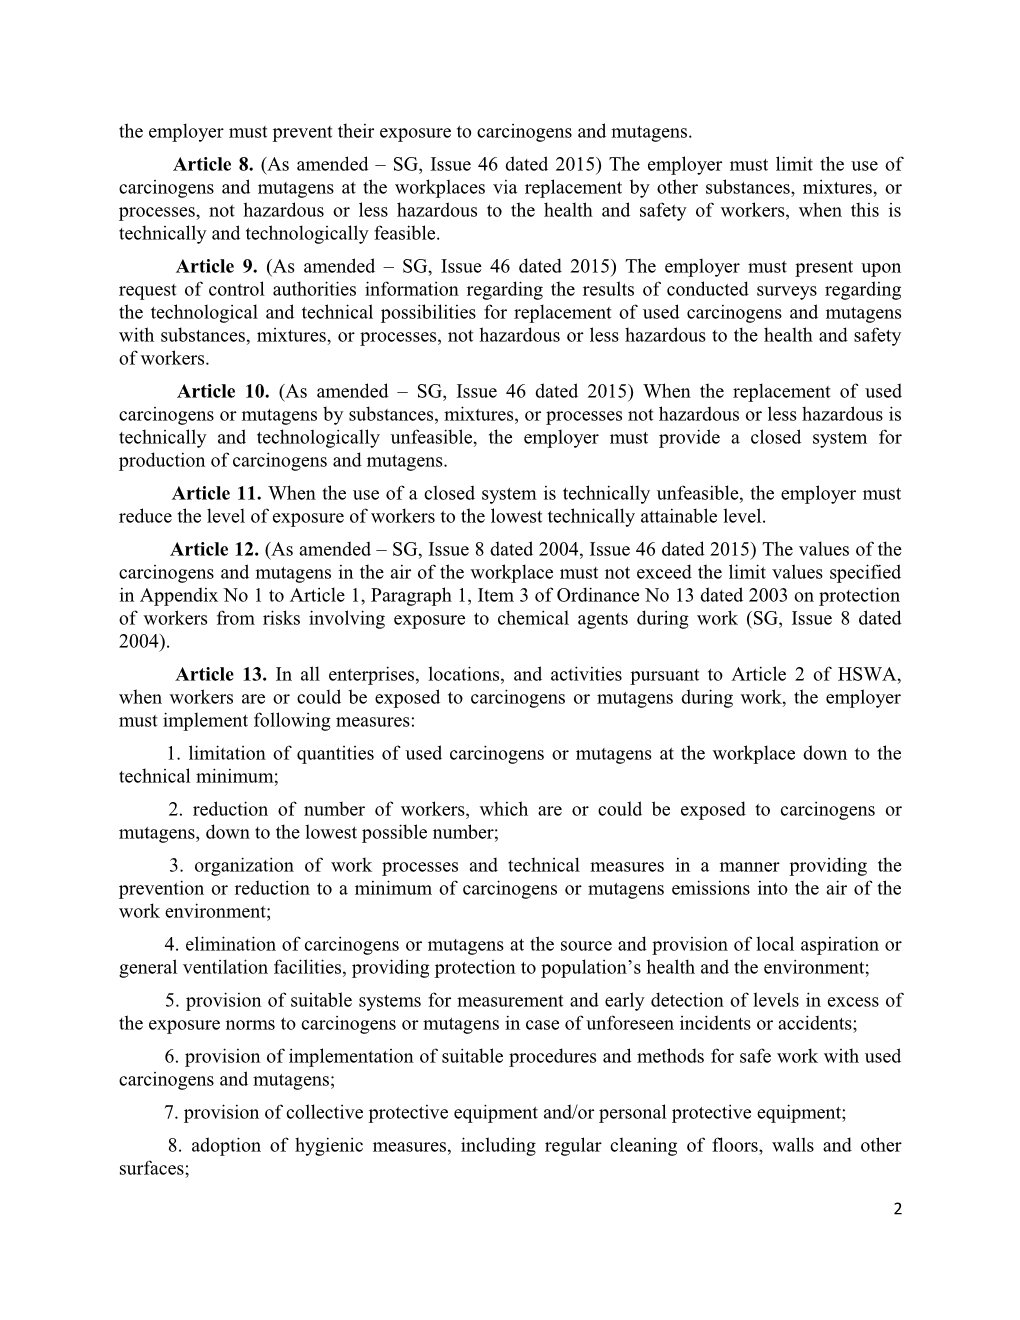 Ordinance No 10 Dated 26.09.2003 on Protection of Workers from Risks Involving Exposure